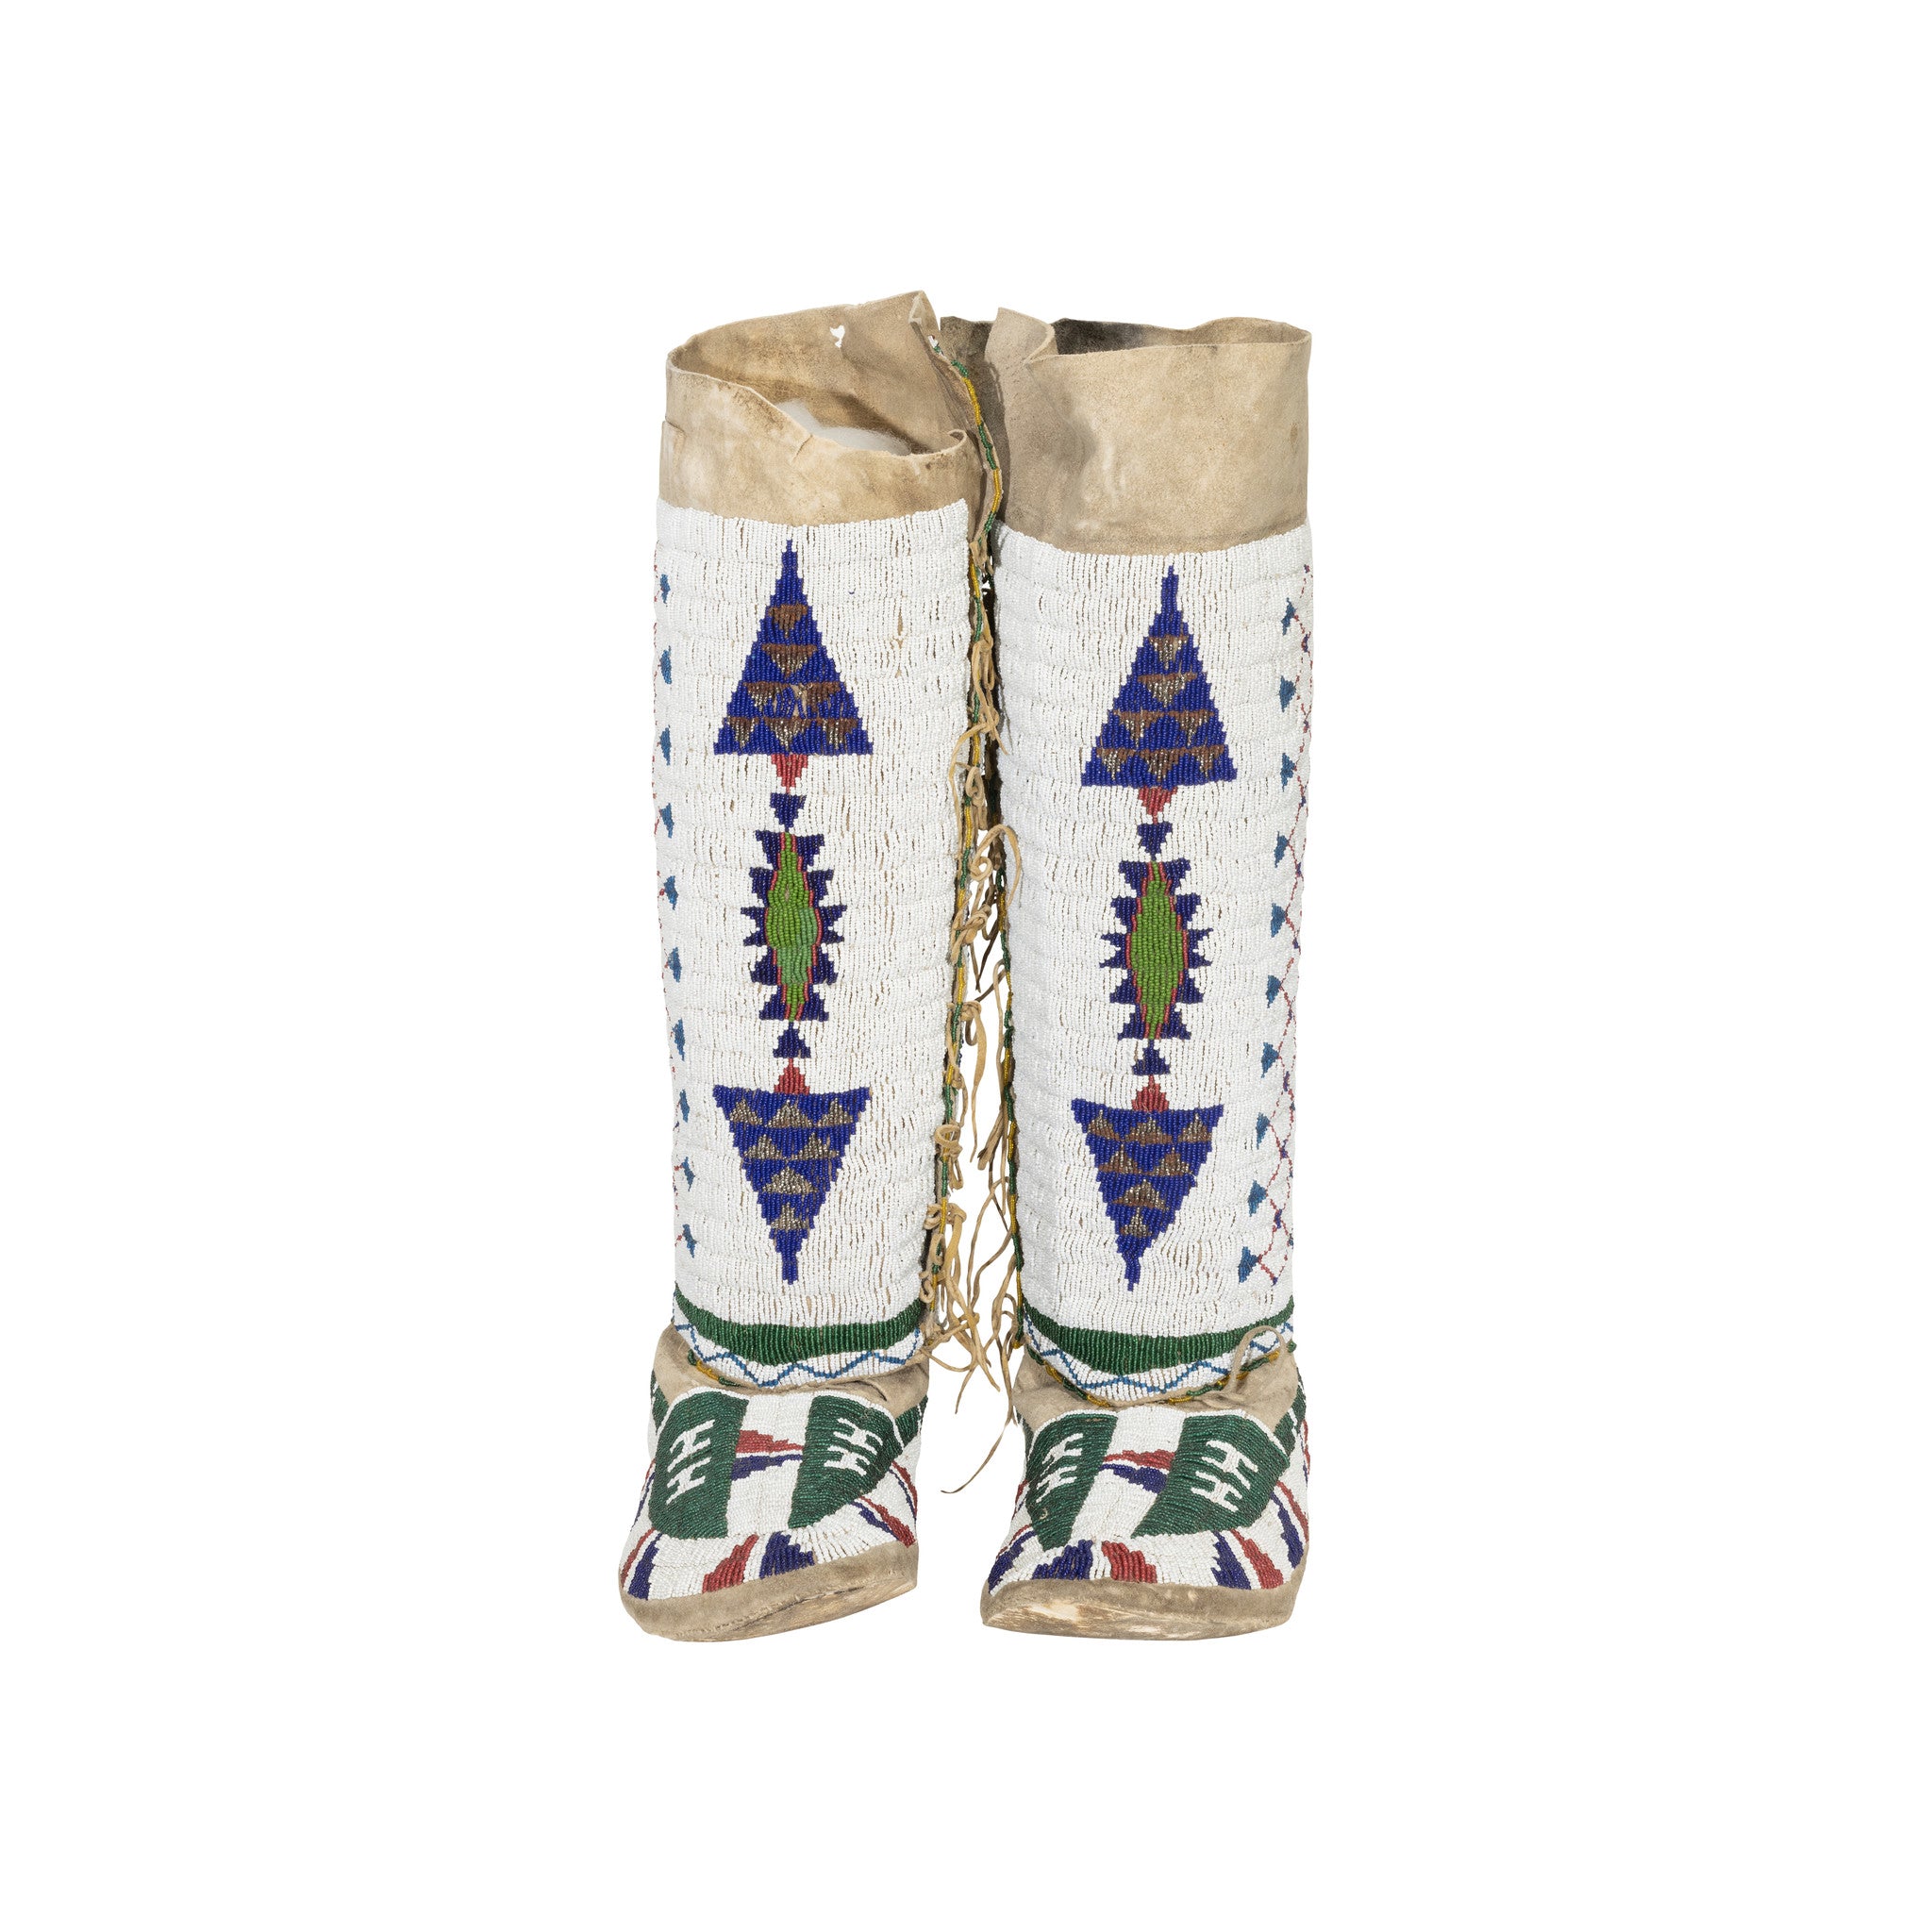 Sioux Moccasins and Leggings